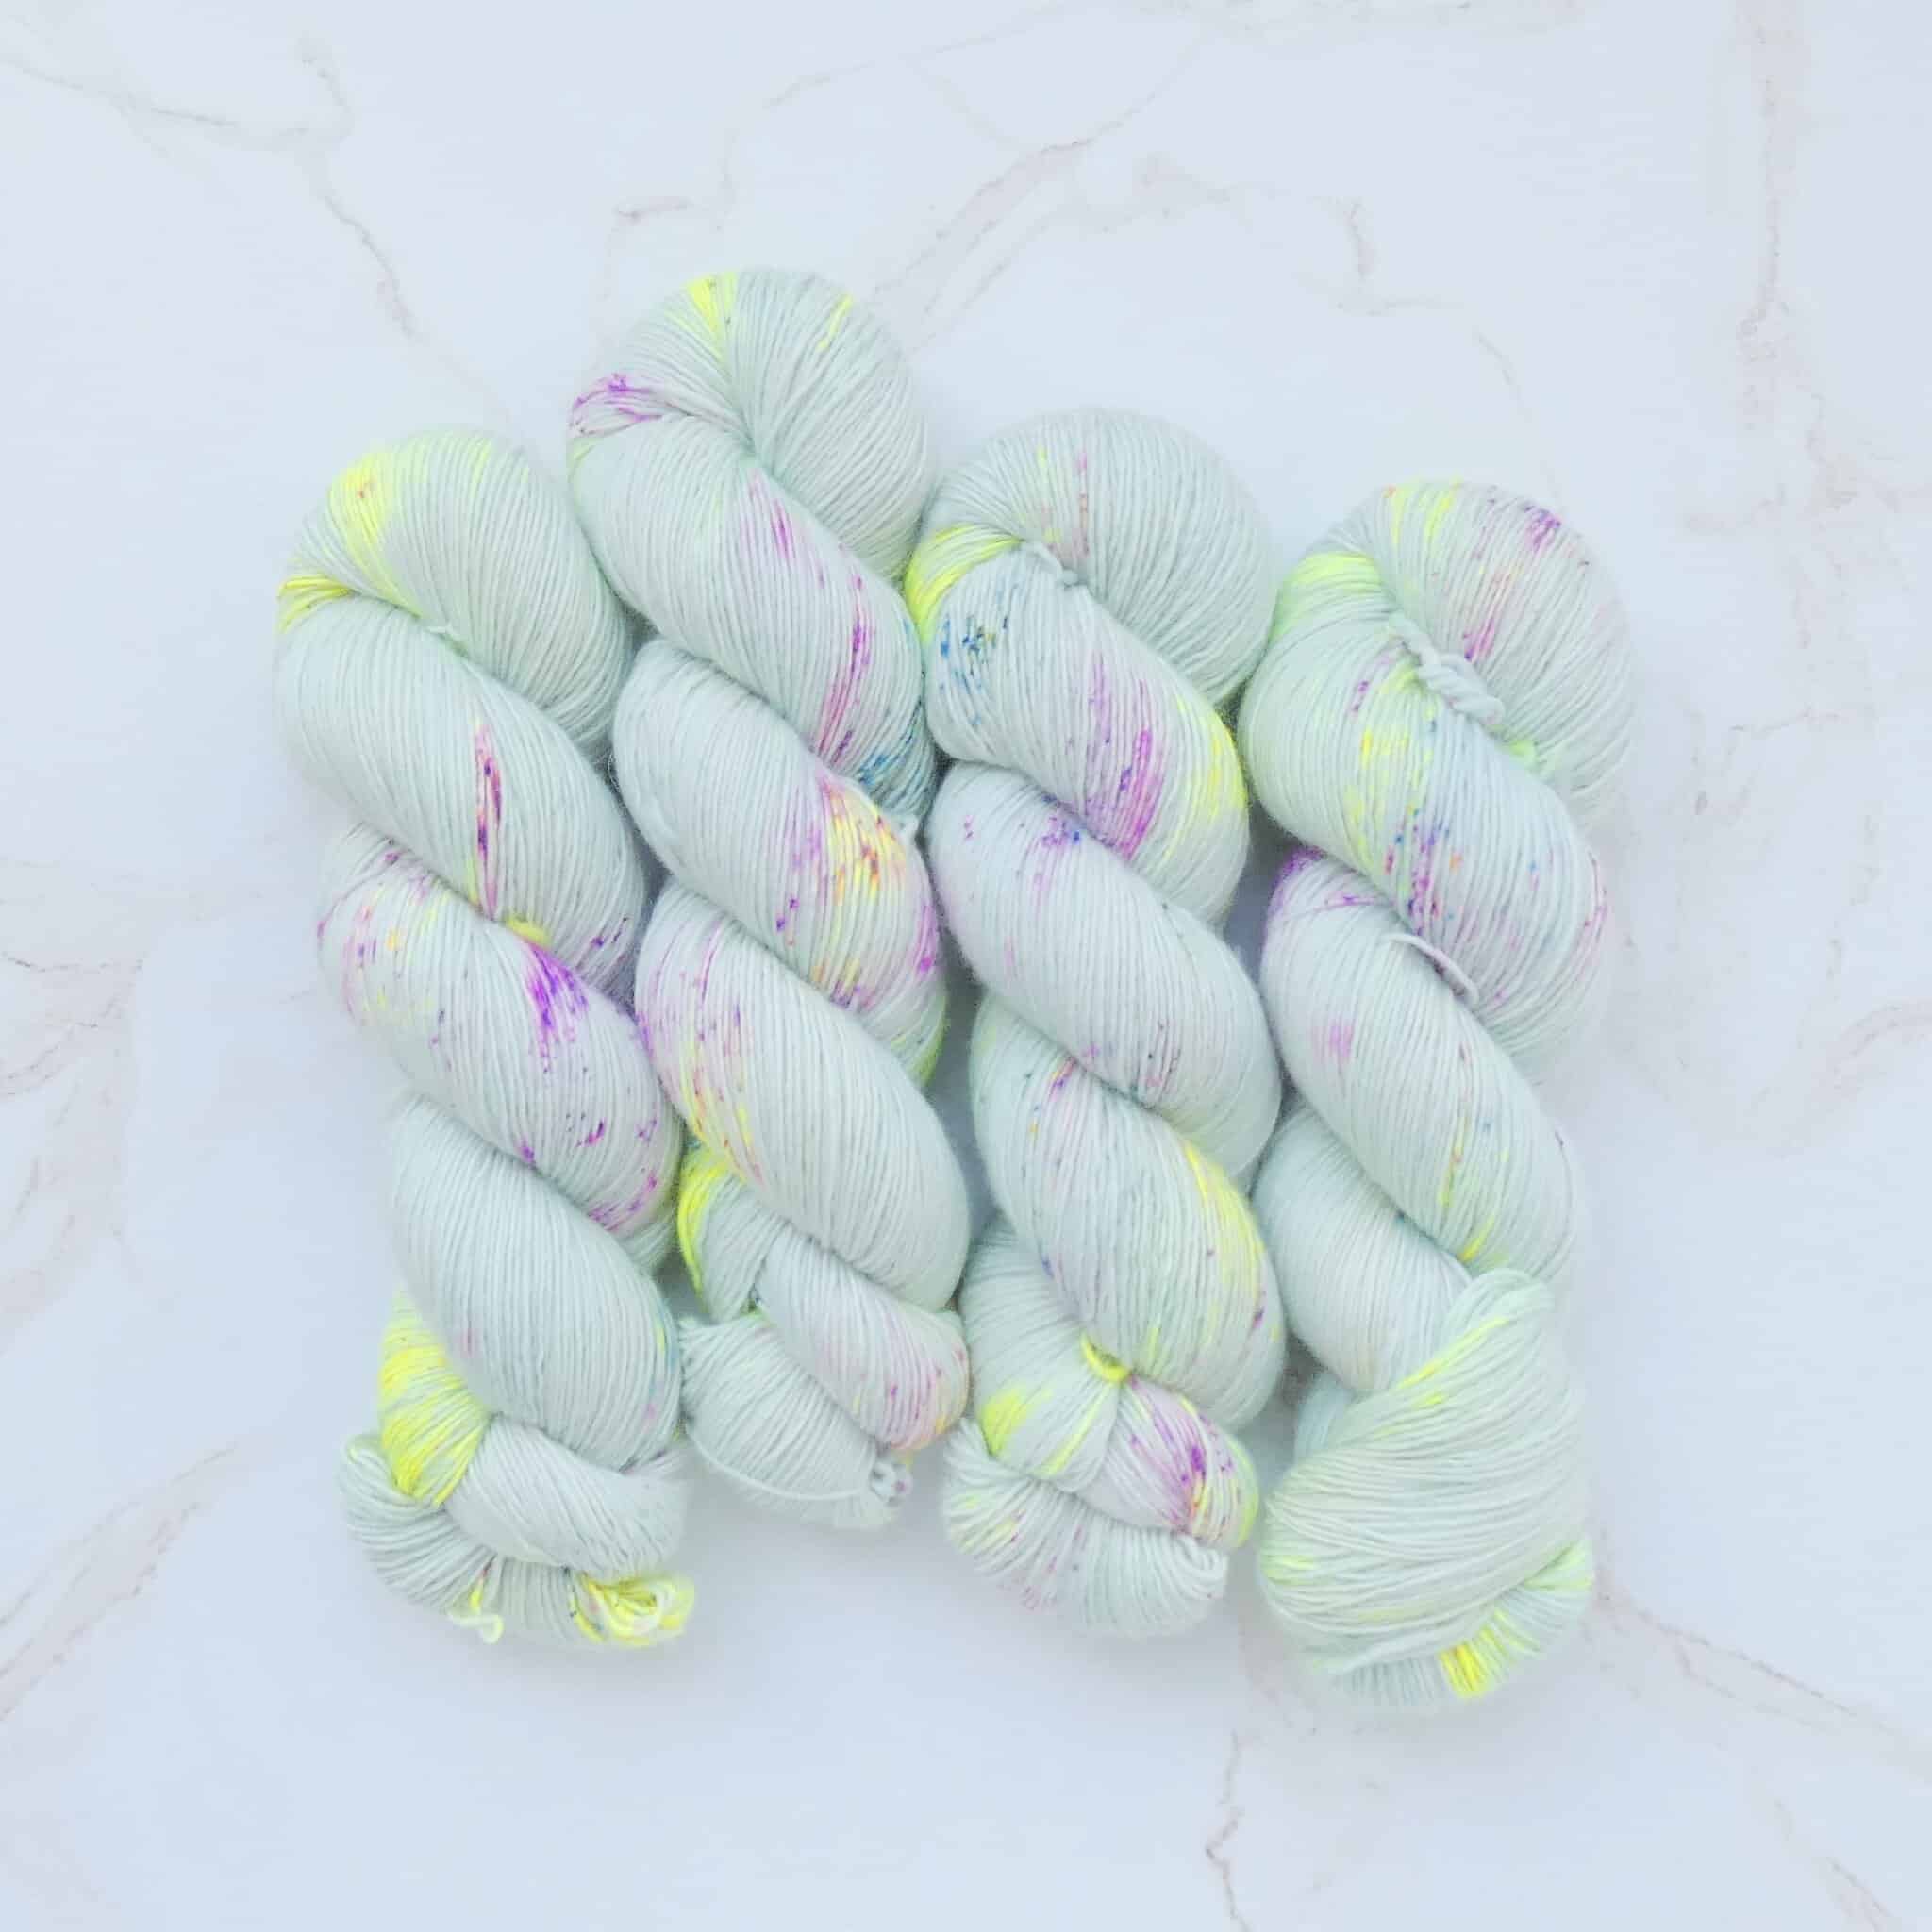 A pastel sage yarn speckled with pops of neon yellow and pink and deep green.